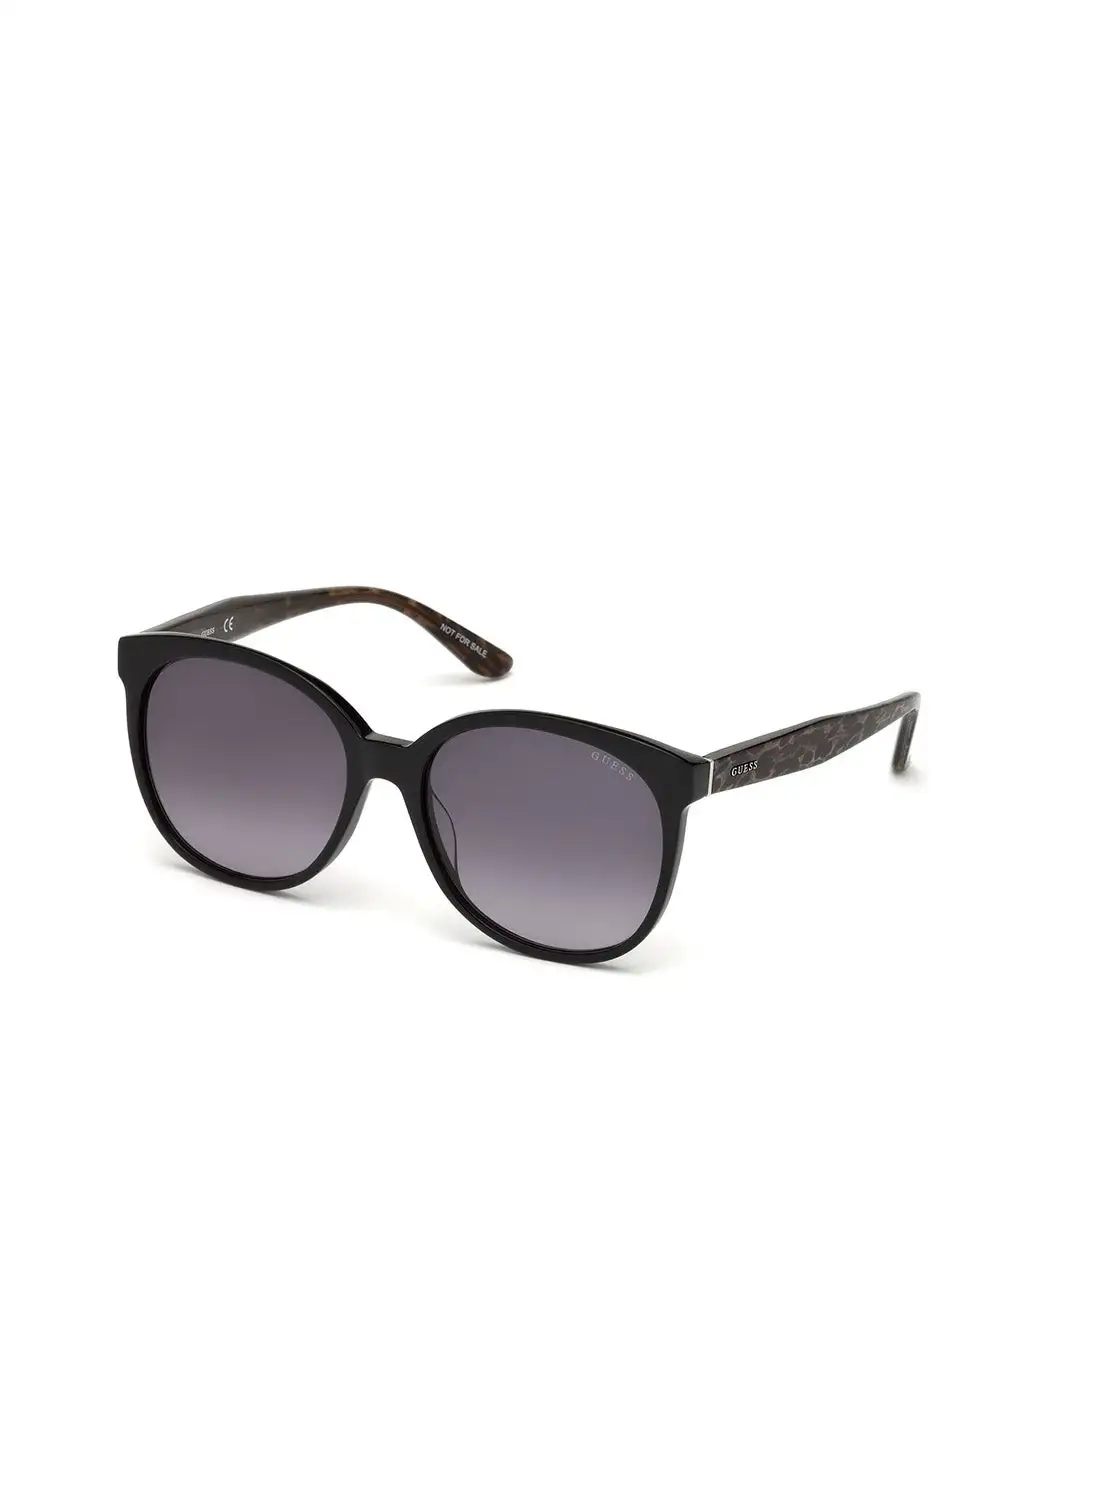 GUESS Women's UV Protection Round Sunglasses - GU751905B57 - Lens Size: 57 Mm